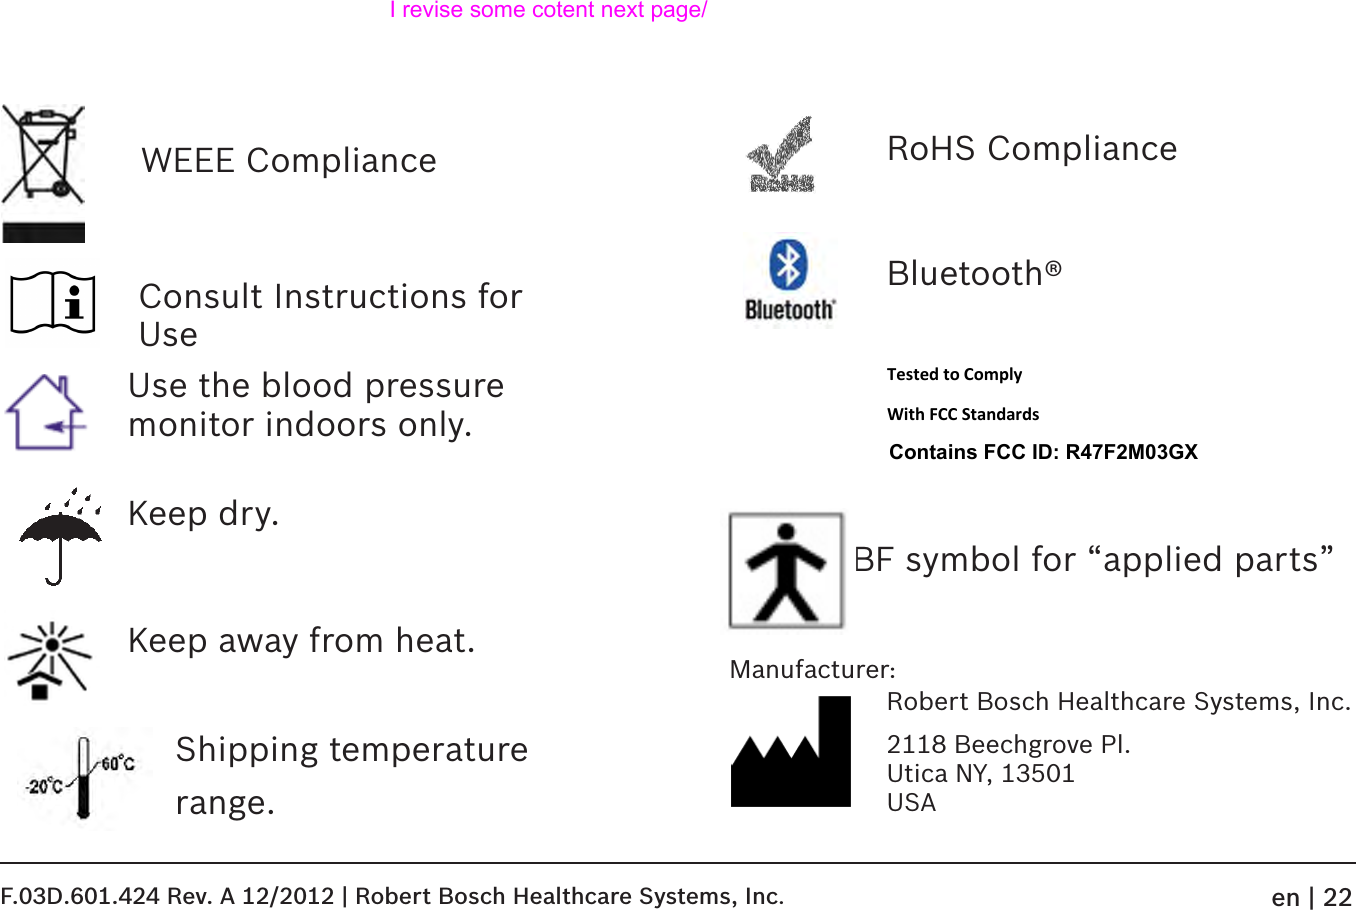 WEEE ComplianceConsult Instructions for Use Use the blood pressure monitor indoors only.Keep dry.Keep away from heat.Shipping temperaturerange.RoHS ComplianceBluetooth® Tested to Comply  With FCC Standards  Contains FCC ID: R47F2M03GX  BF symbol for “applied parts”Robert Bosch Healthcare Systems, Inc.2118 Beechgrove Pl. Utica NY, 13501 USAManufacturer:F.03D.601.424 Rev. A 12/2012 | Robert Bosch Healthcare Systems, Inc.en | 22I revise some cotent next page/